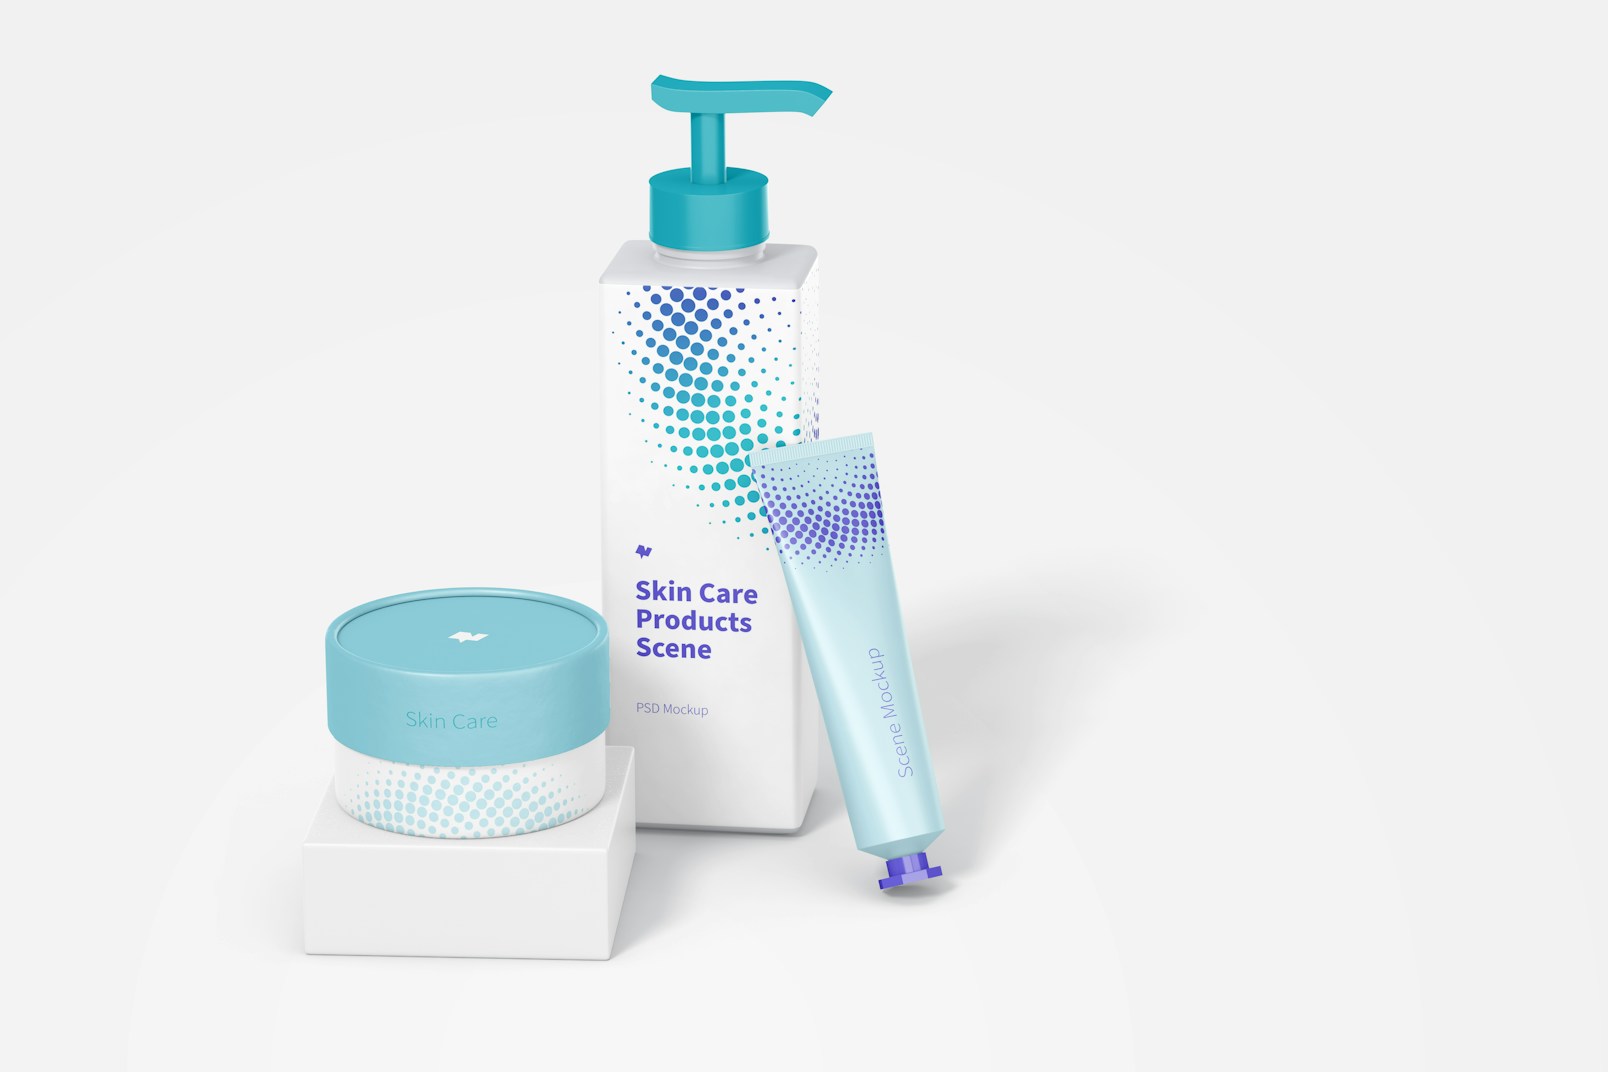 Skin Care Products Scene Mockup, Perspective View